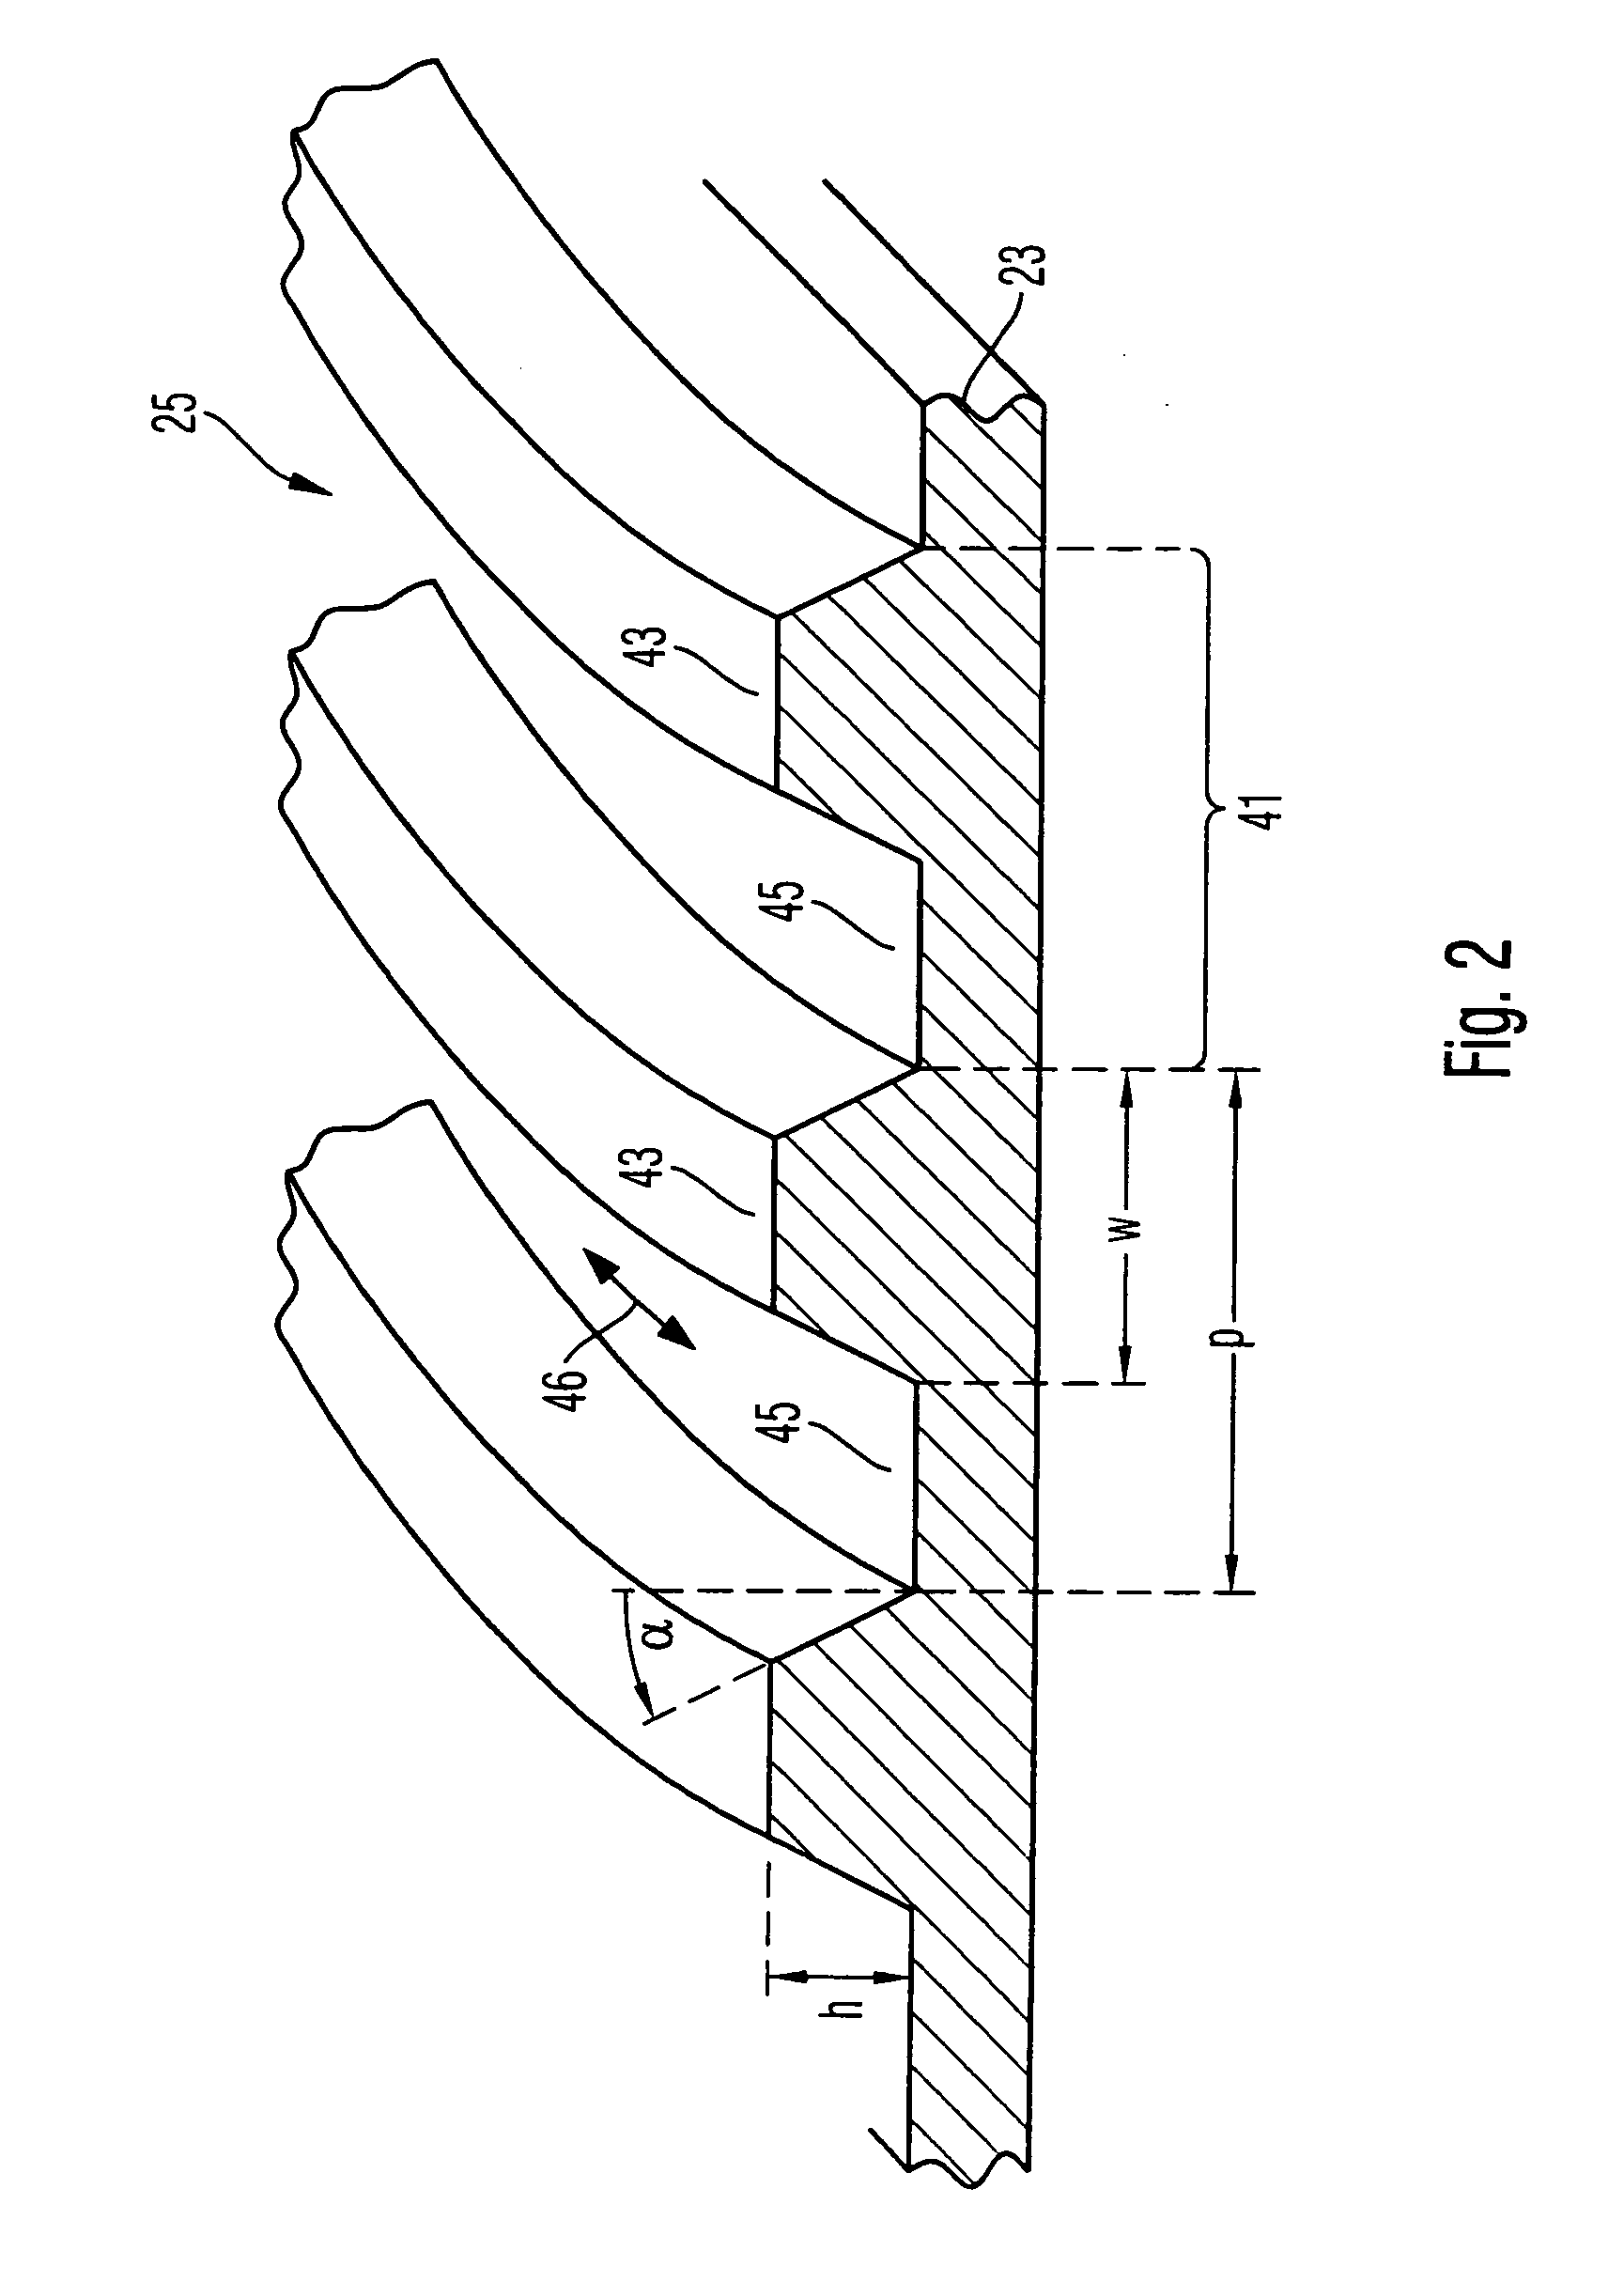 Method of qualifying a diffraction grating and method of manufacturing an optical element